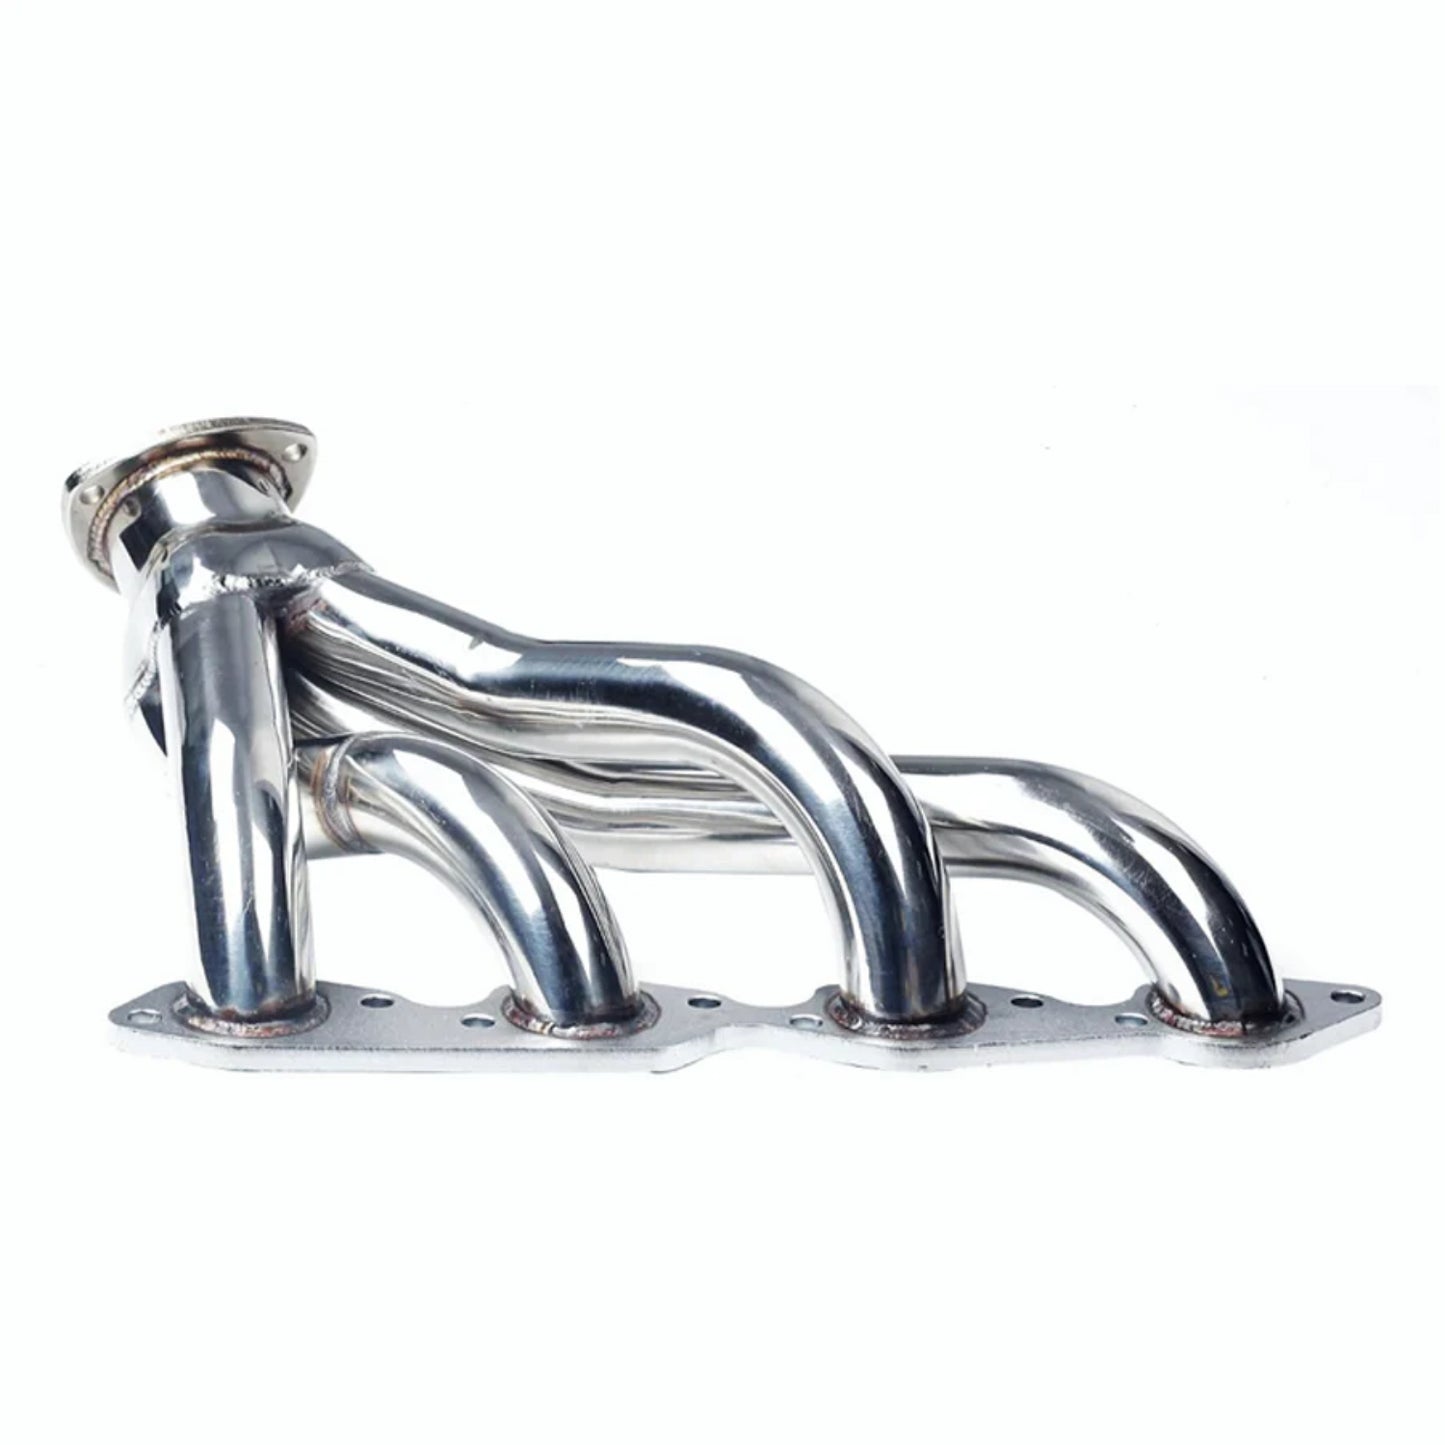 Exhaust Manifold Shorty Racing Header for Chevy Big Block 396/402/427/454/502 V8 Engines